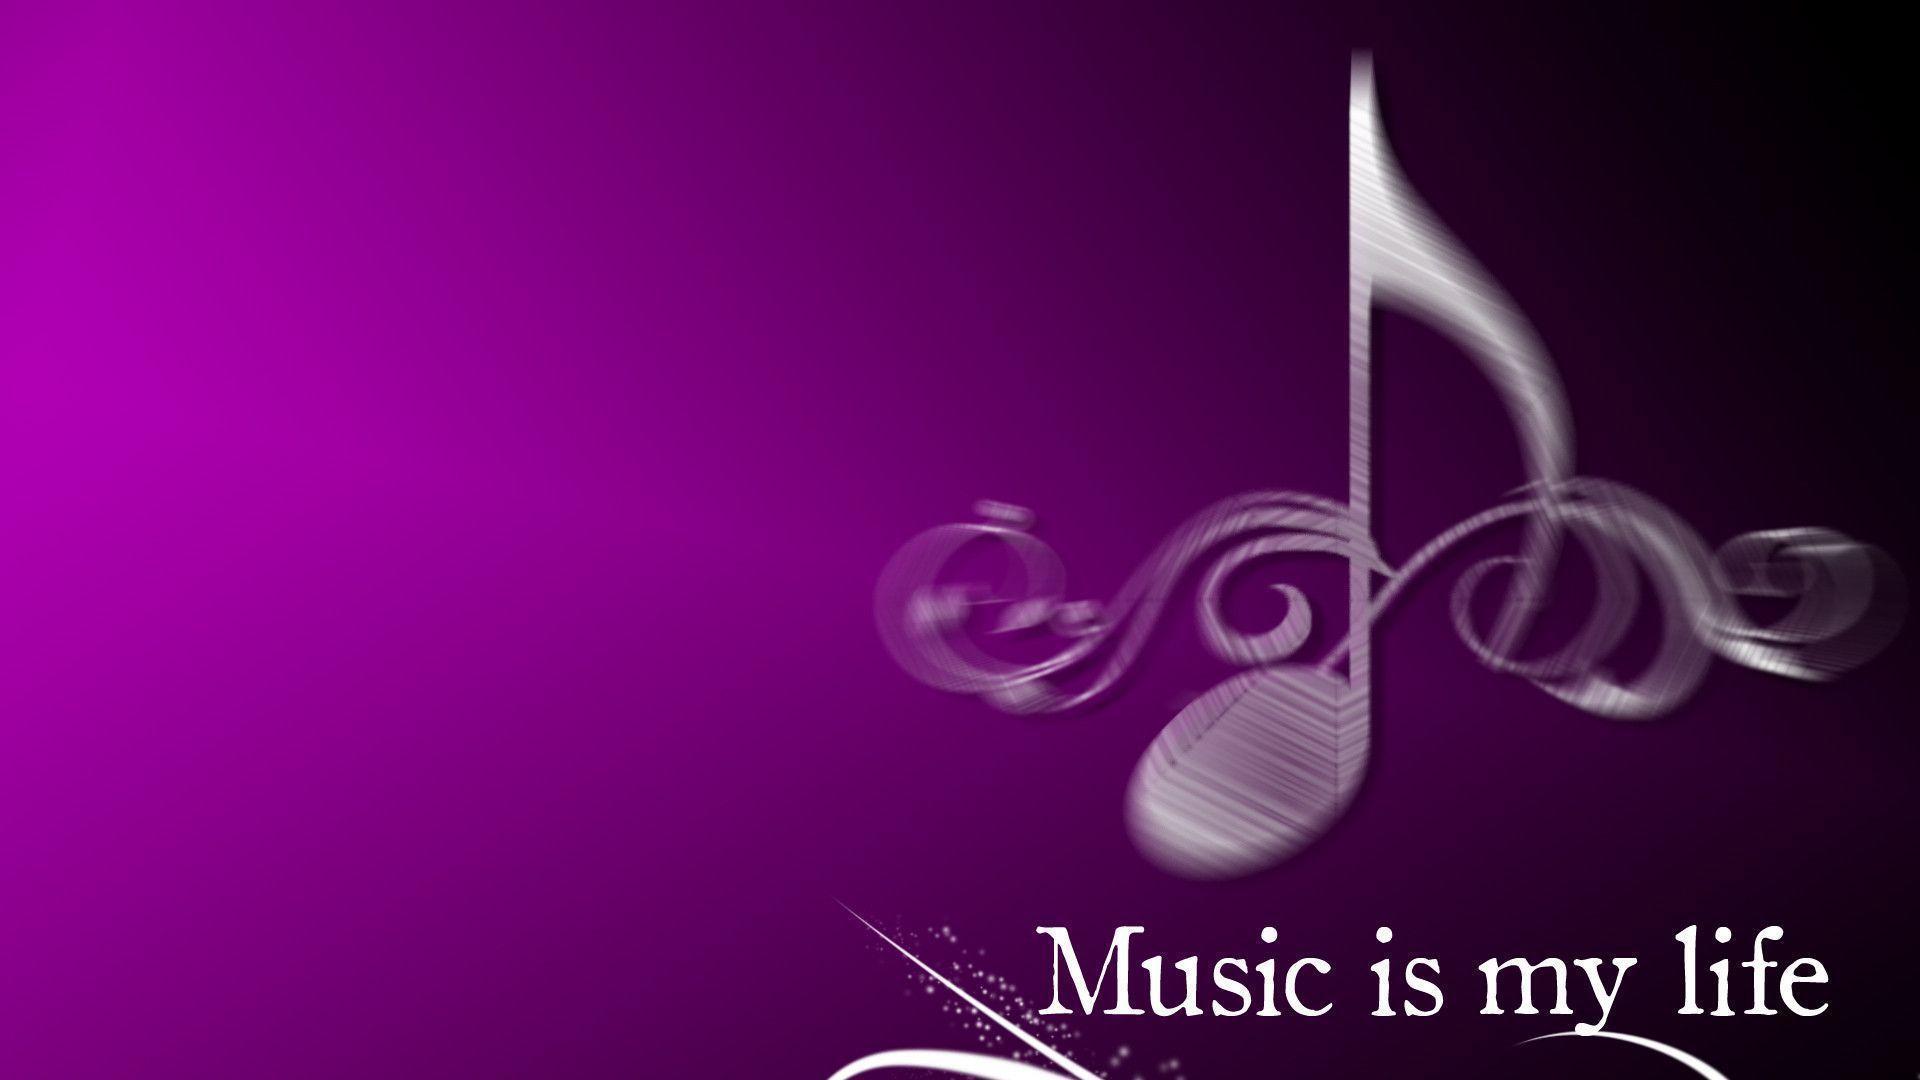 Wallpapers For > Music Is My Life Wallpapers